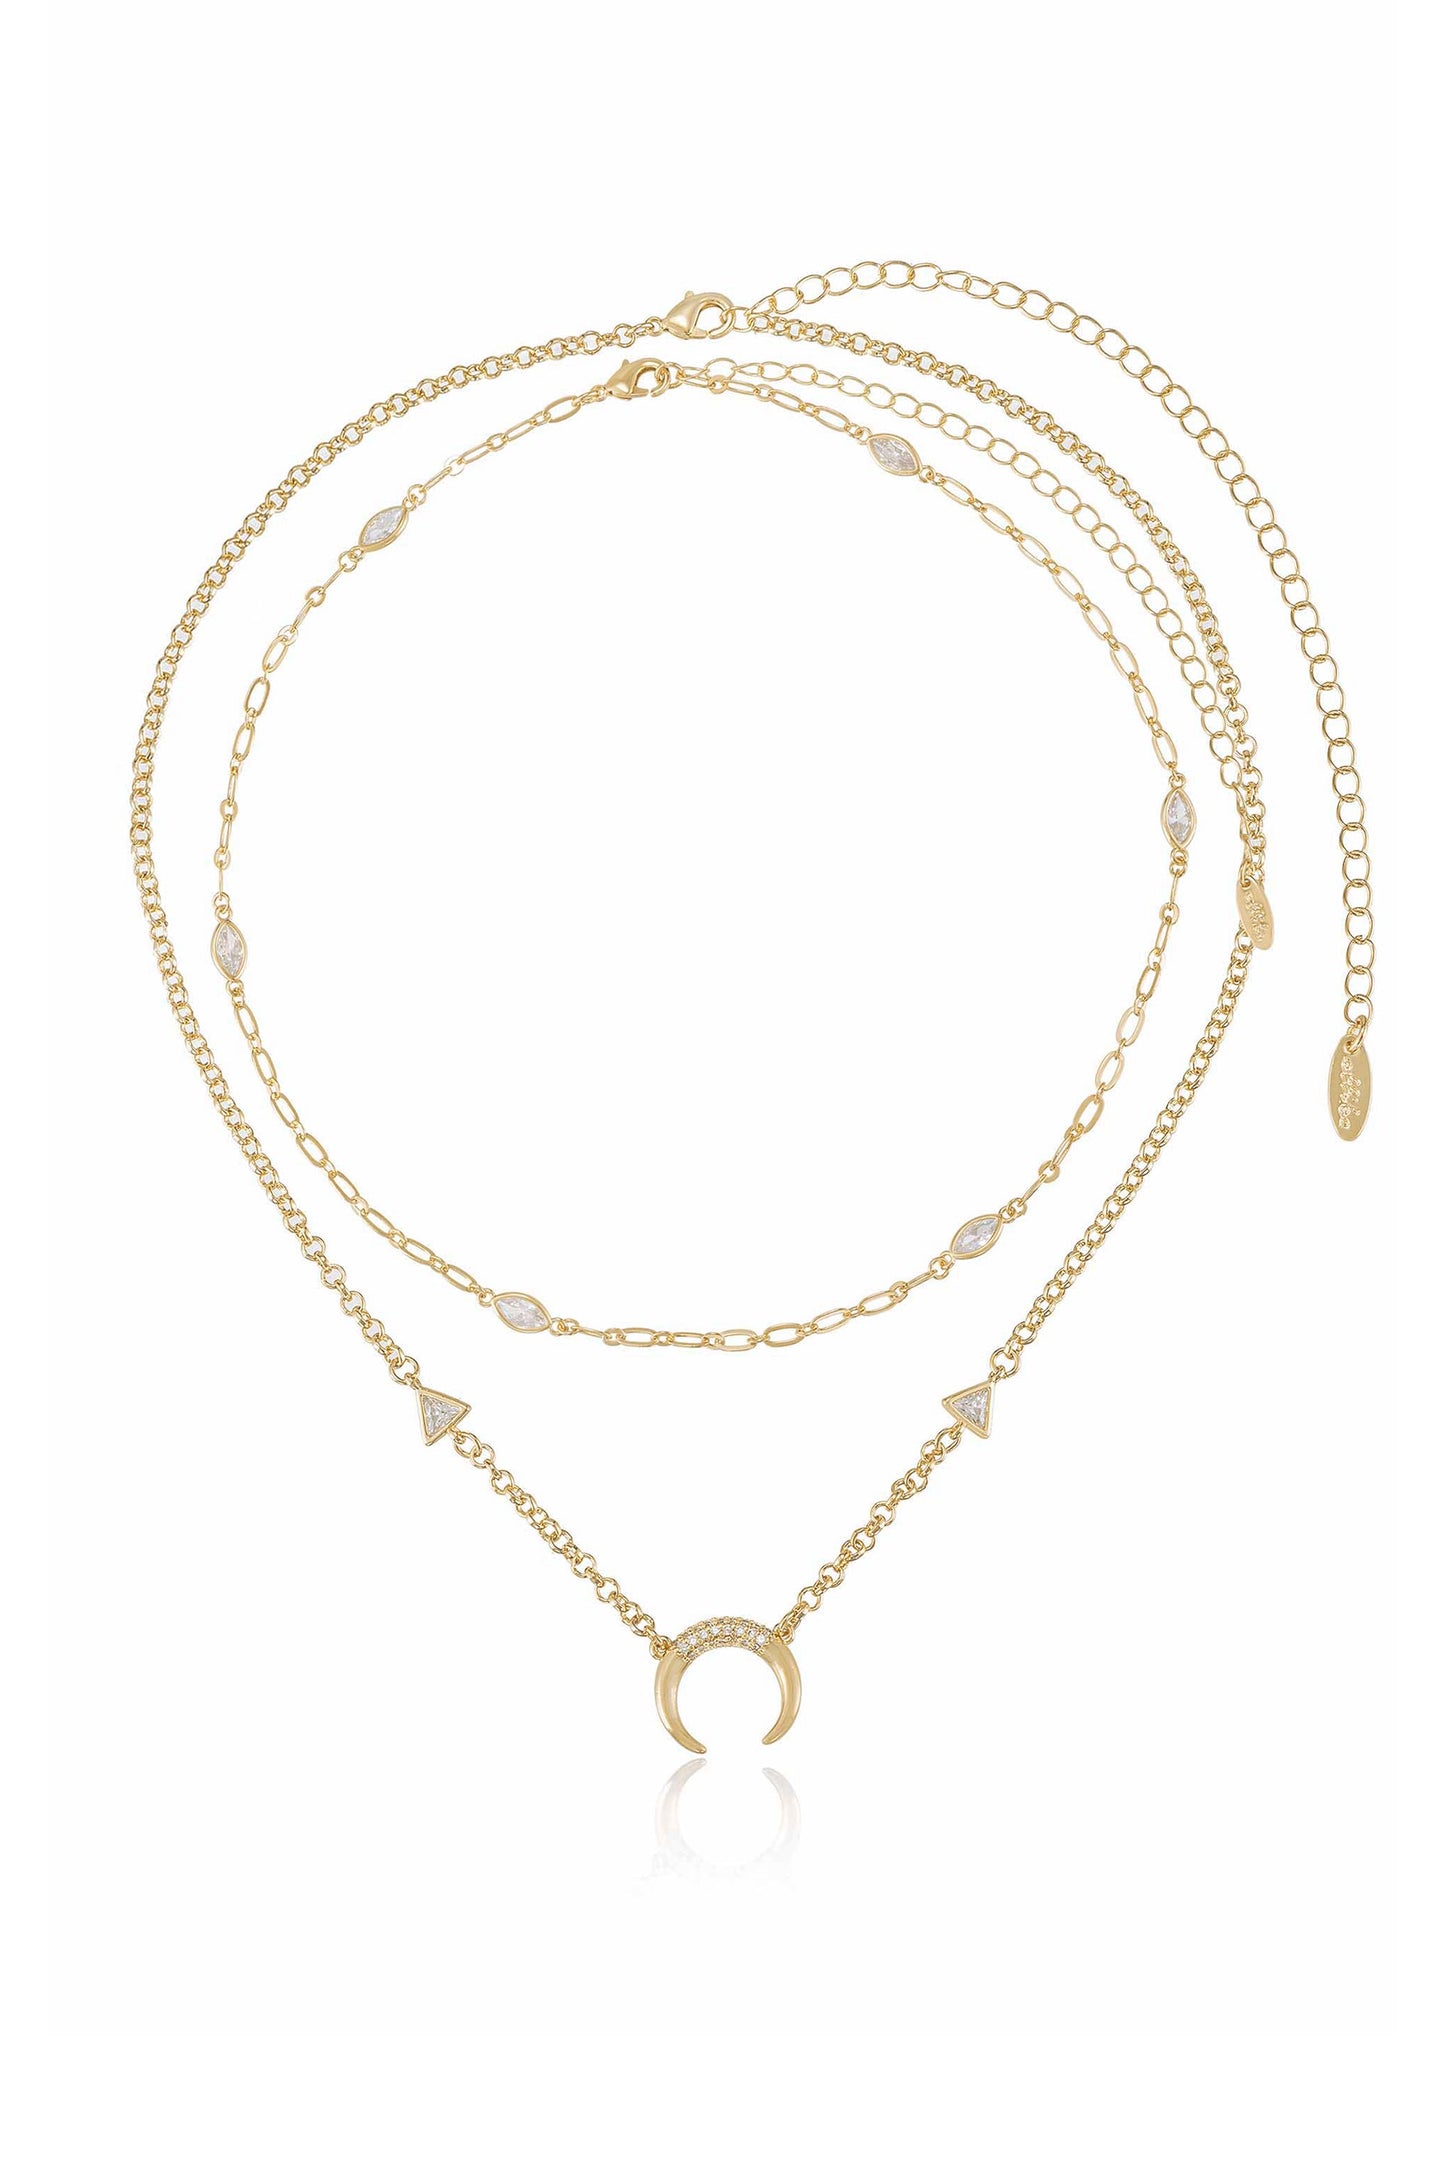 Mesmerize Me Crescent Horn 18k Gold Plated Layered Necklace Set full